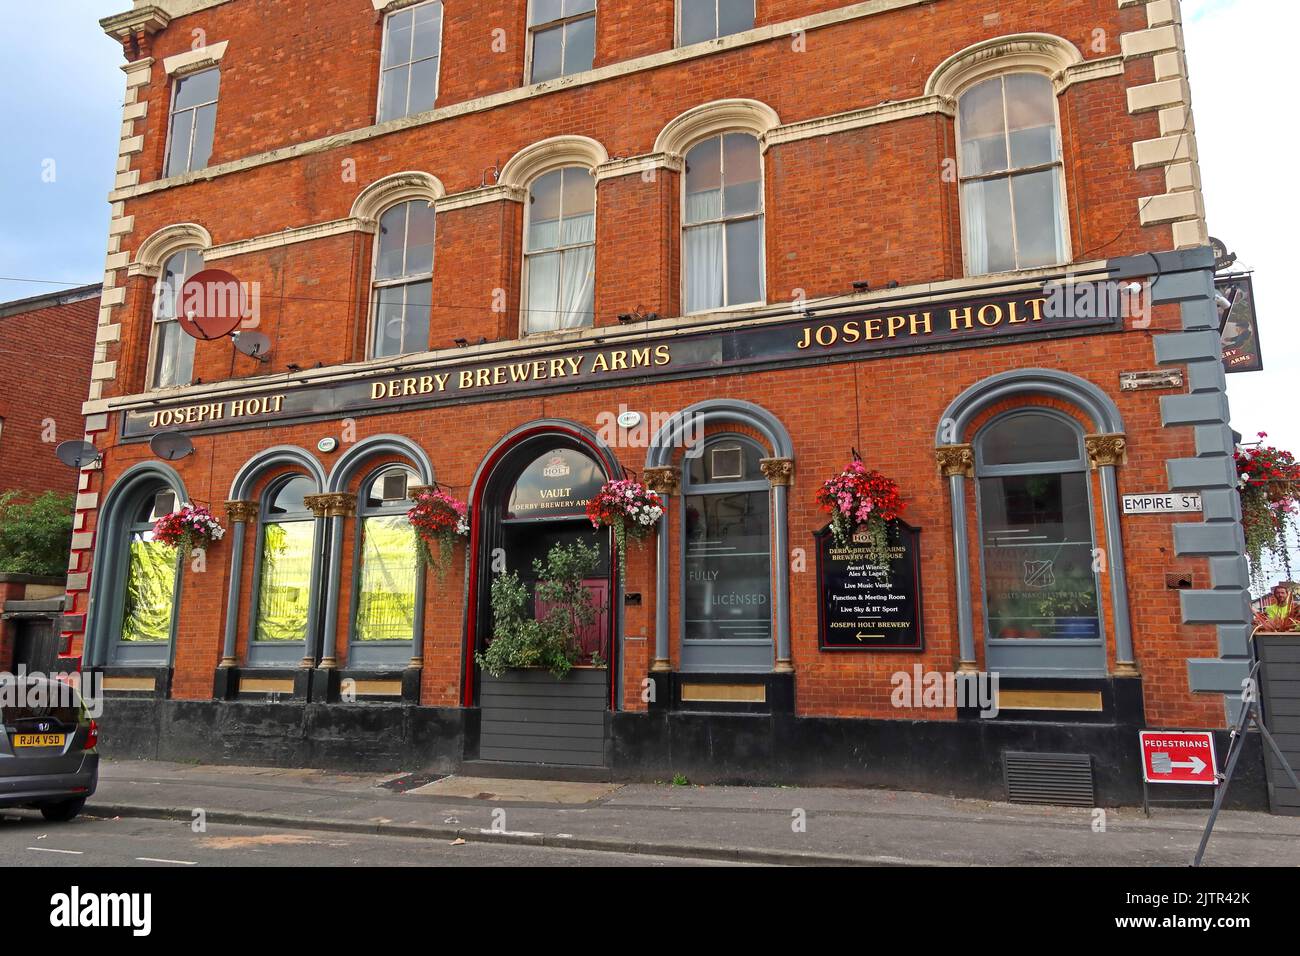 Holts Derby Brewery Arms, Empire St, Cheetham Hill, Manchester, Angleterre, ROYAUME-UNI, M3 1JA Banque D'Images